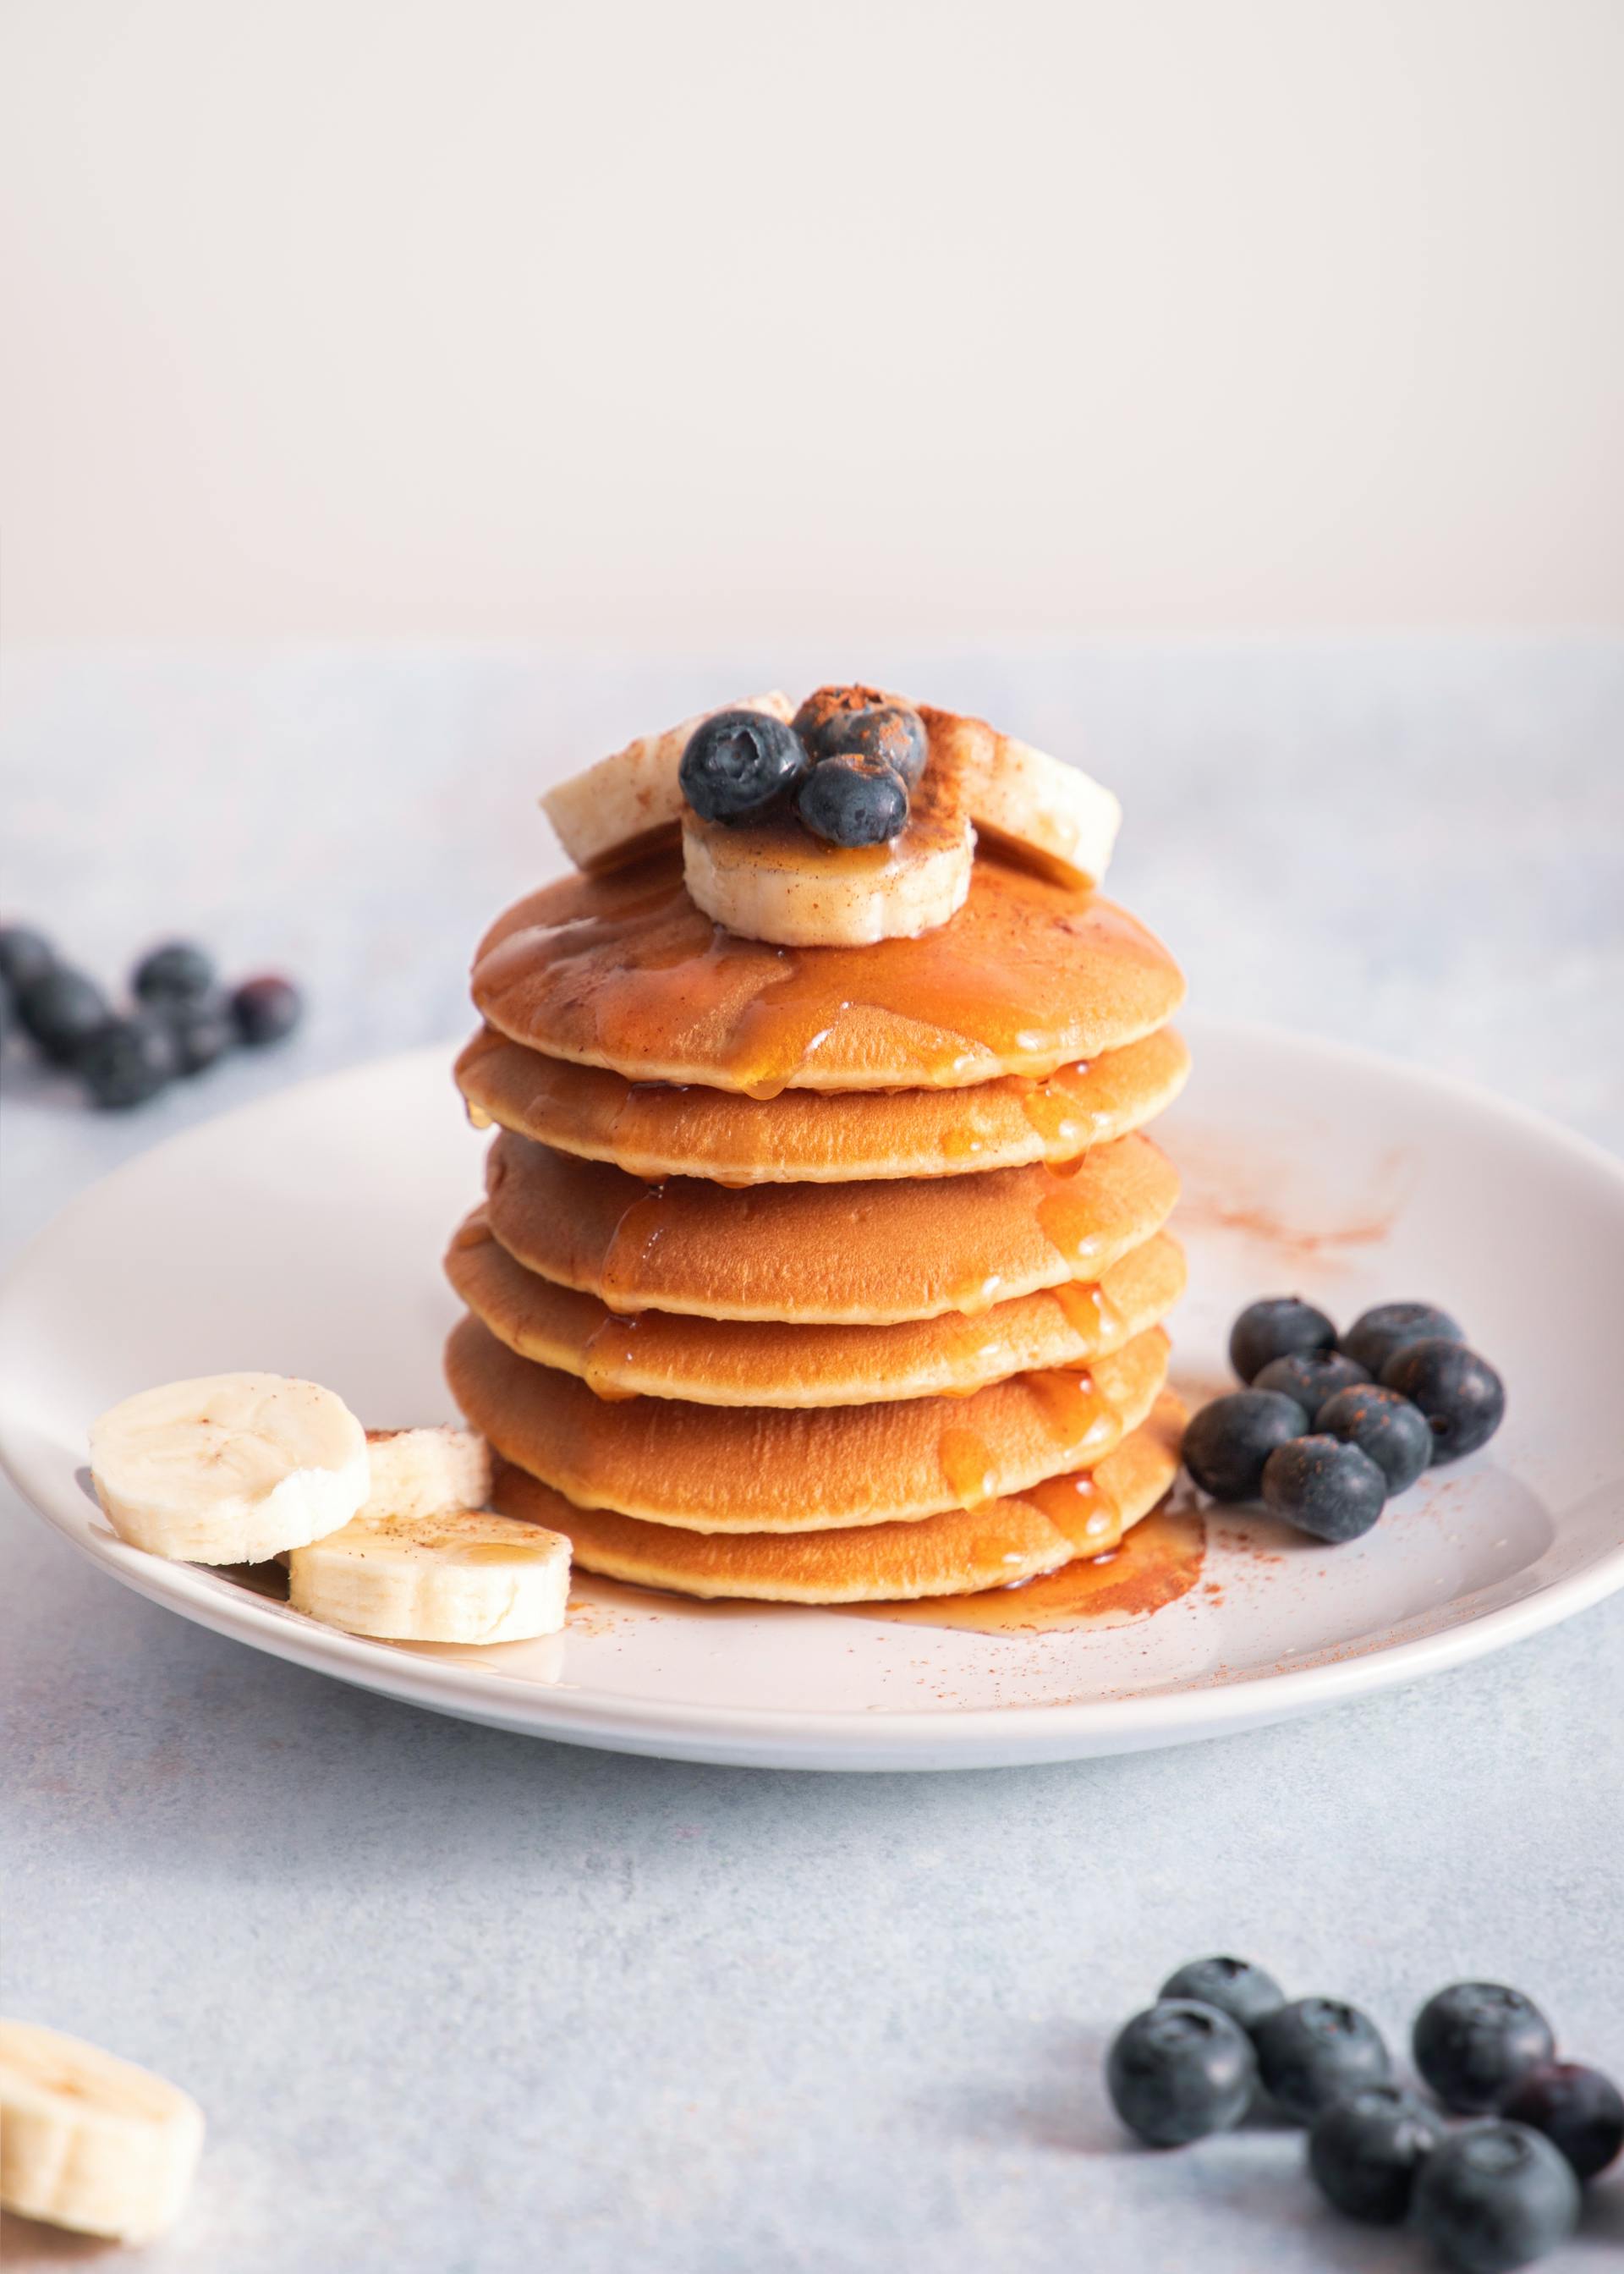 Pancakes on a white plate | Source: Pexels